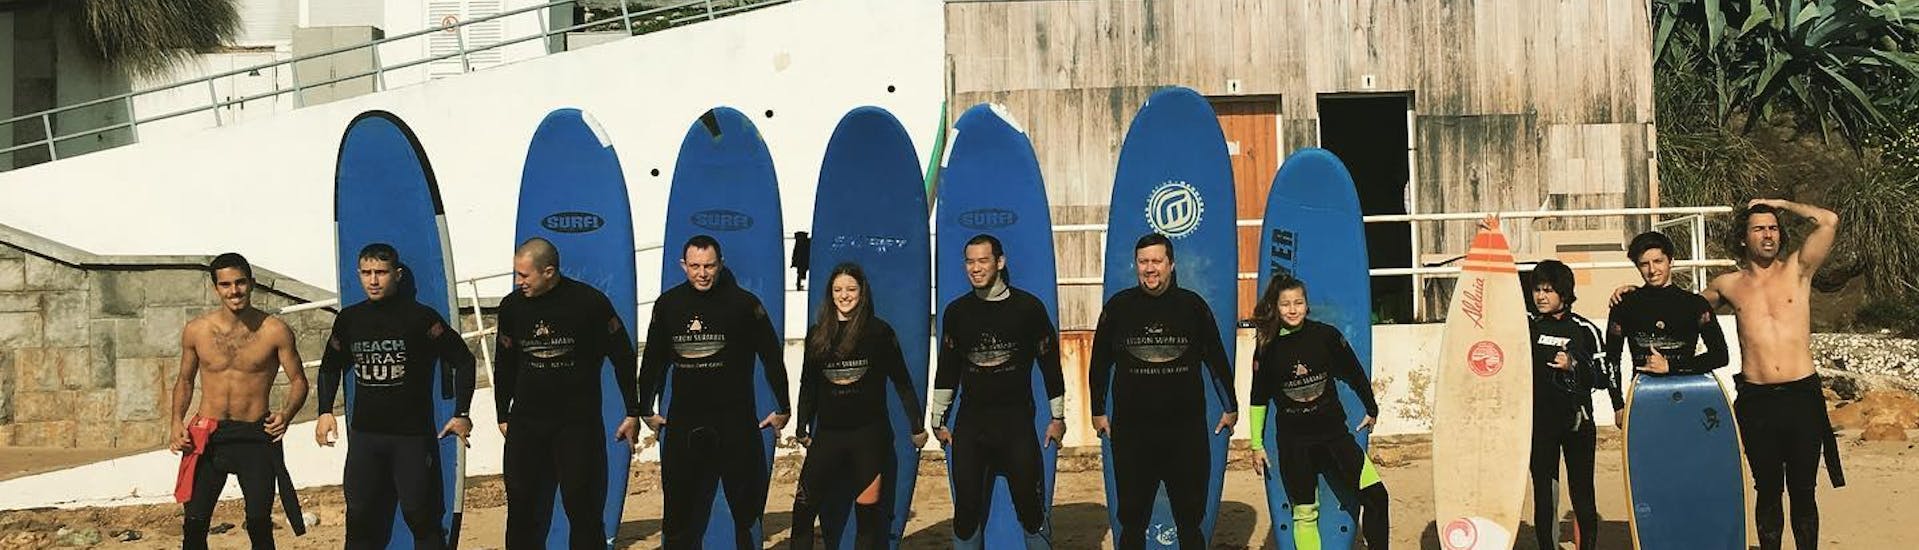 A group of aspiring surfers is posing for a photo alongside their surf instructors from Lisbon Surfaris before they get started with their surfing lessons on Carcavelos Beach near Lisbon.